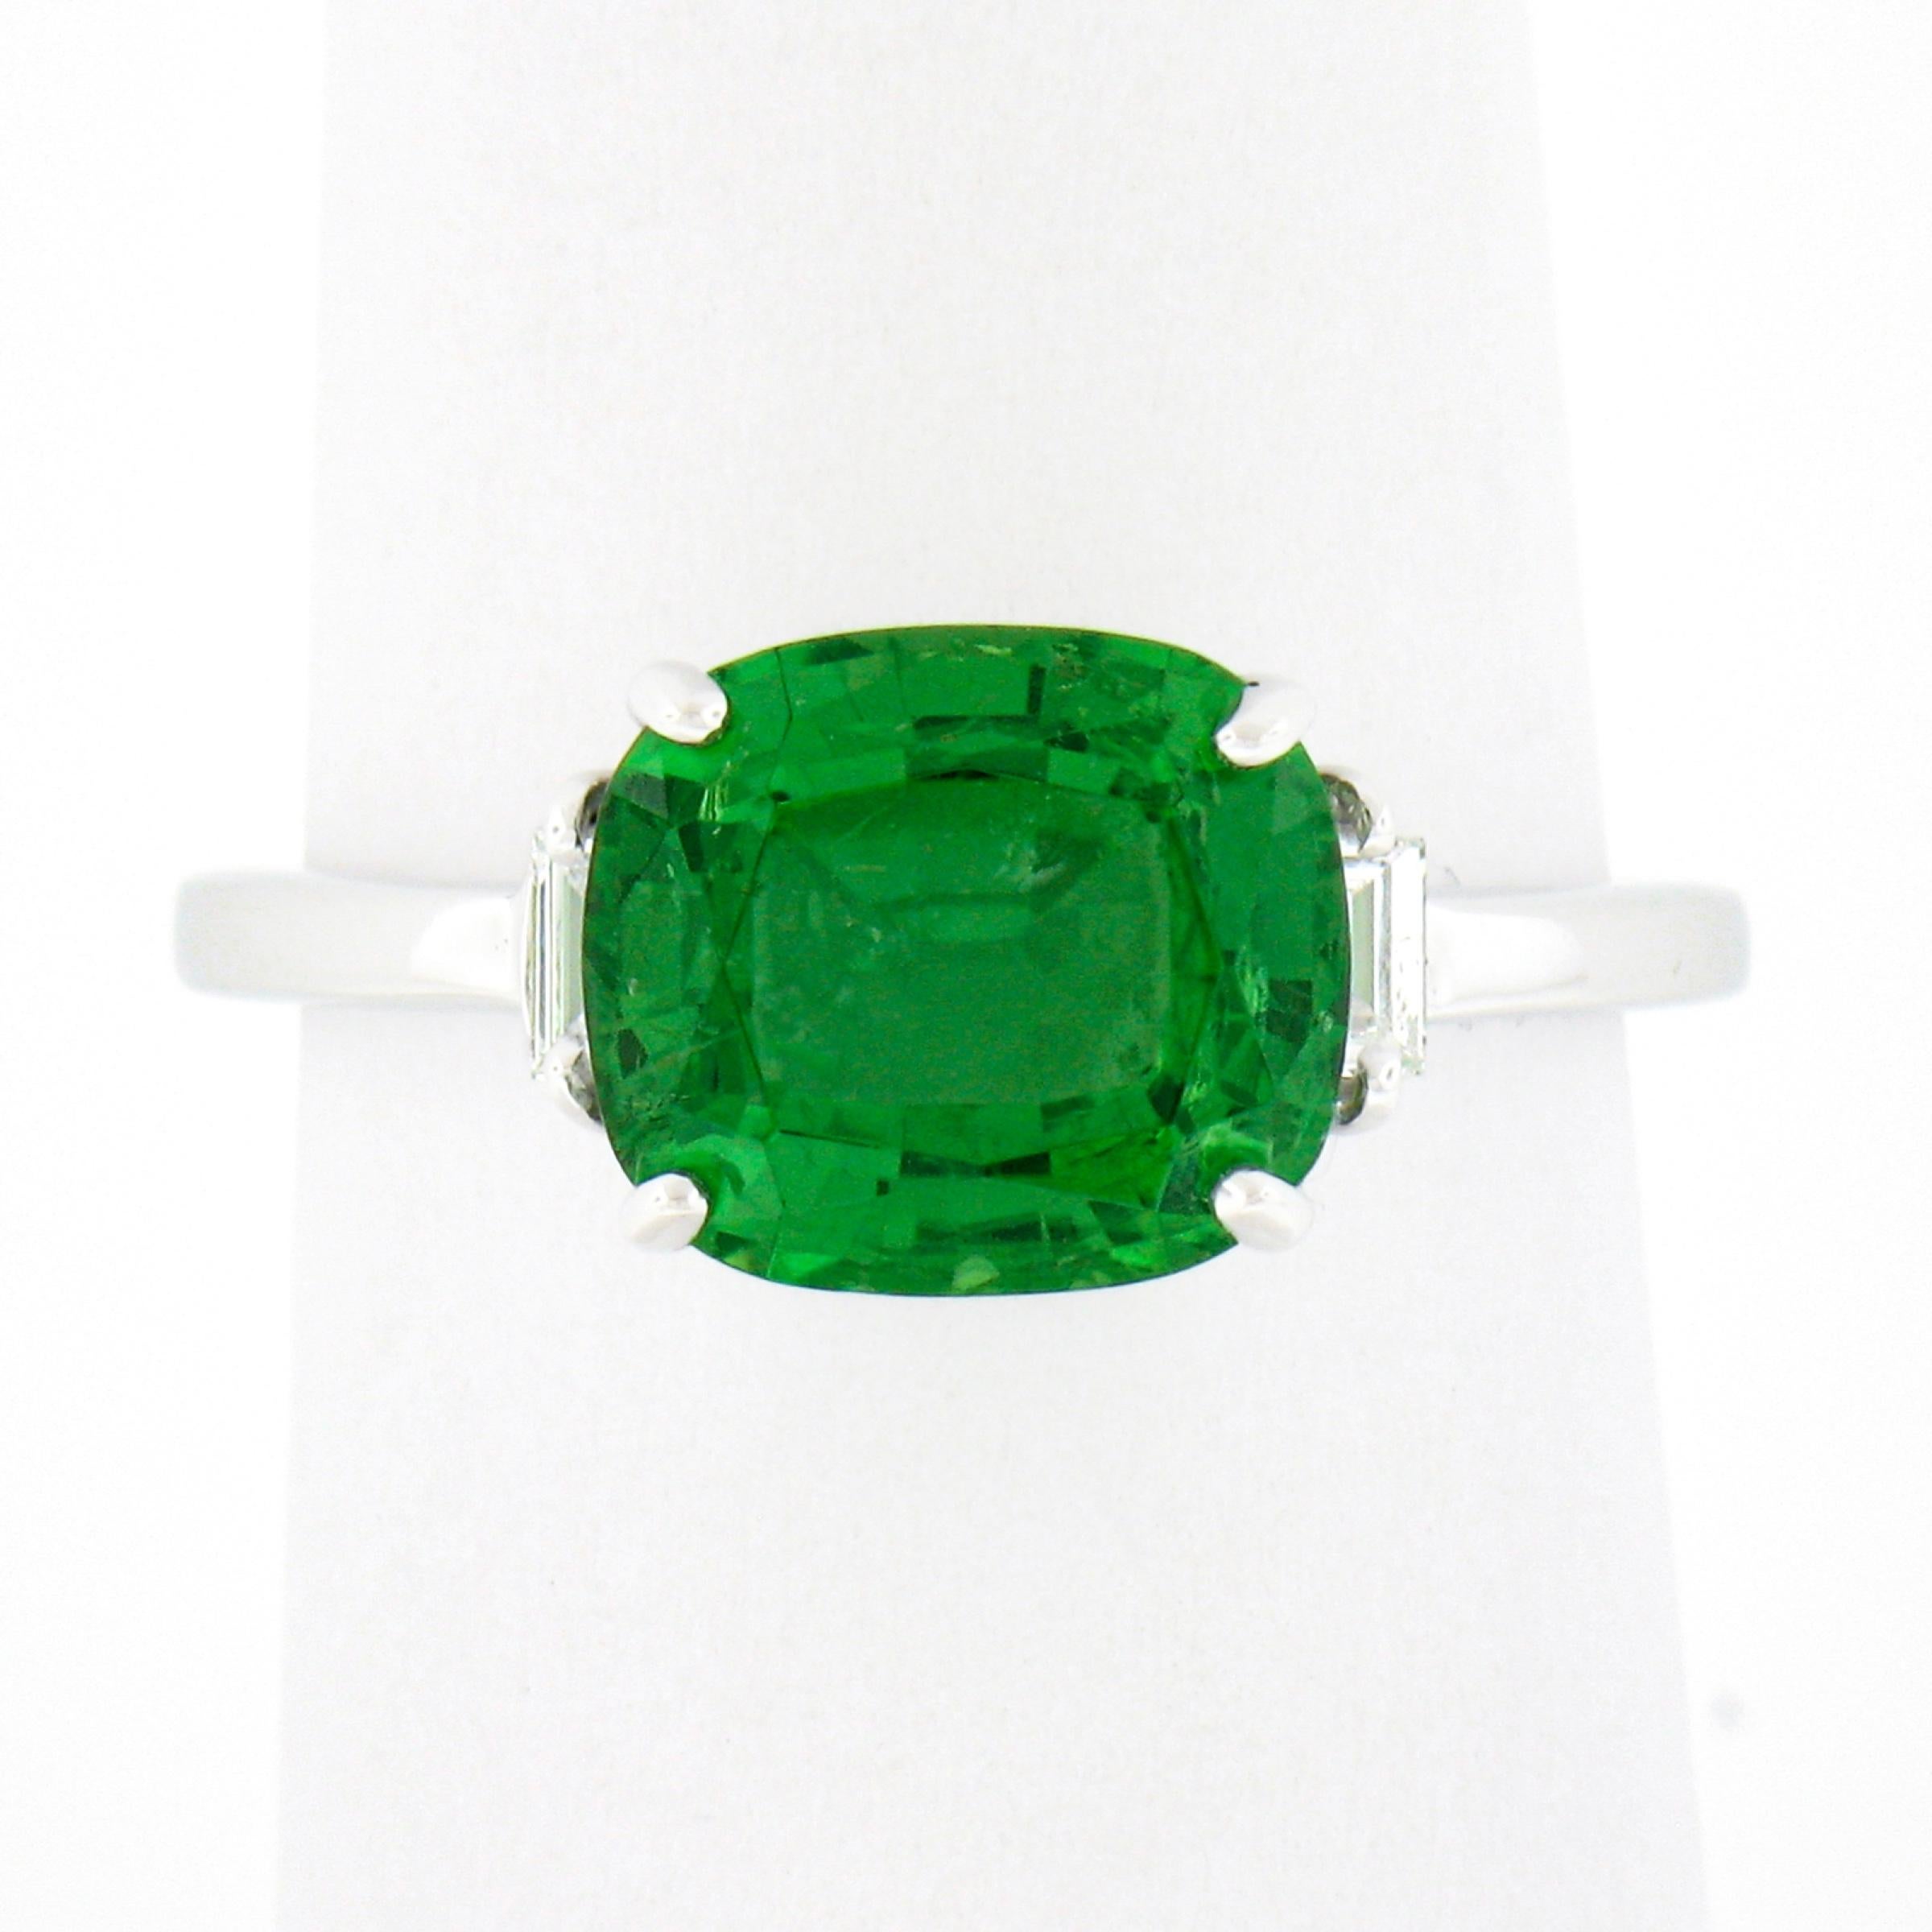 This stunning chrome tourmaline and diamond ring is crafted from solid 14k white gold. The ring features a breathtaking, natural, cushion cut tourmaline solitaire that is neatly set at the center displaying the finest and most desirable vivid green